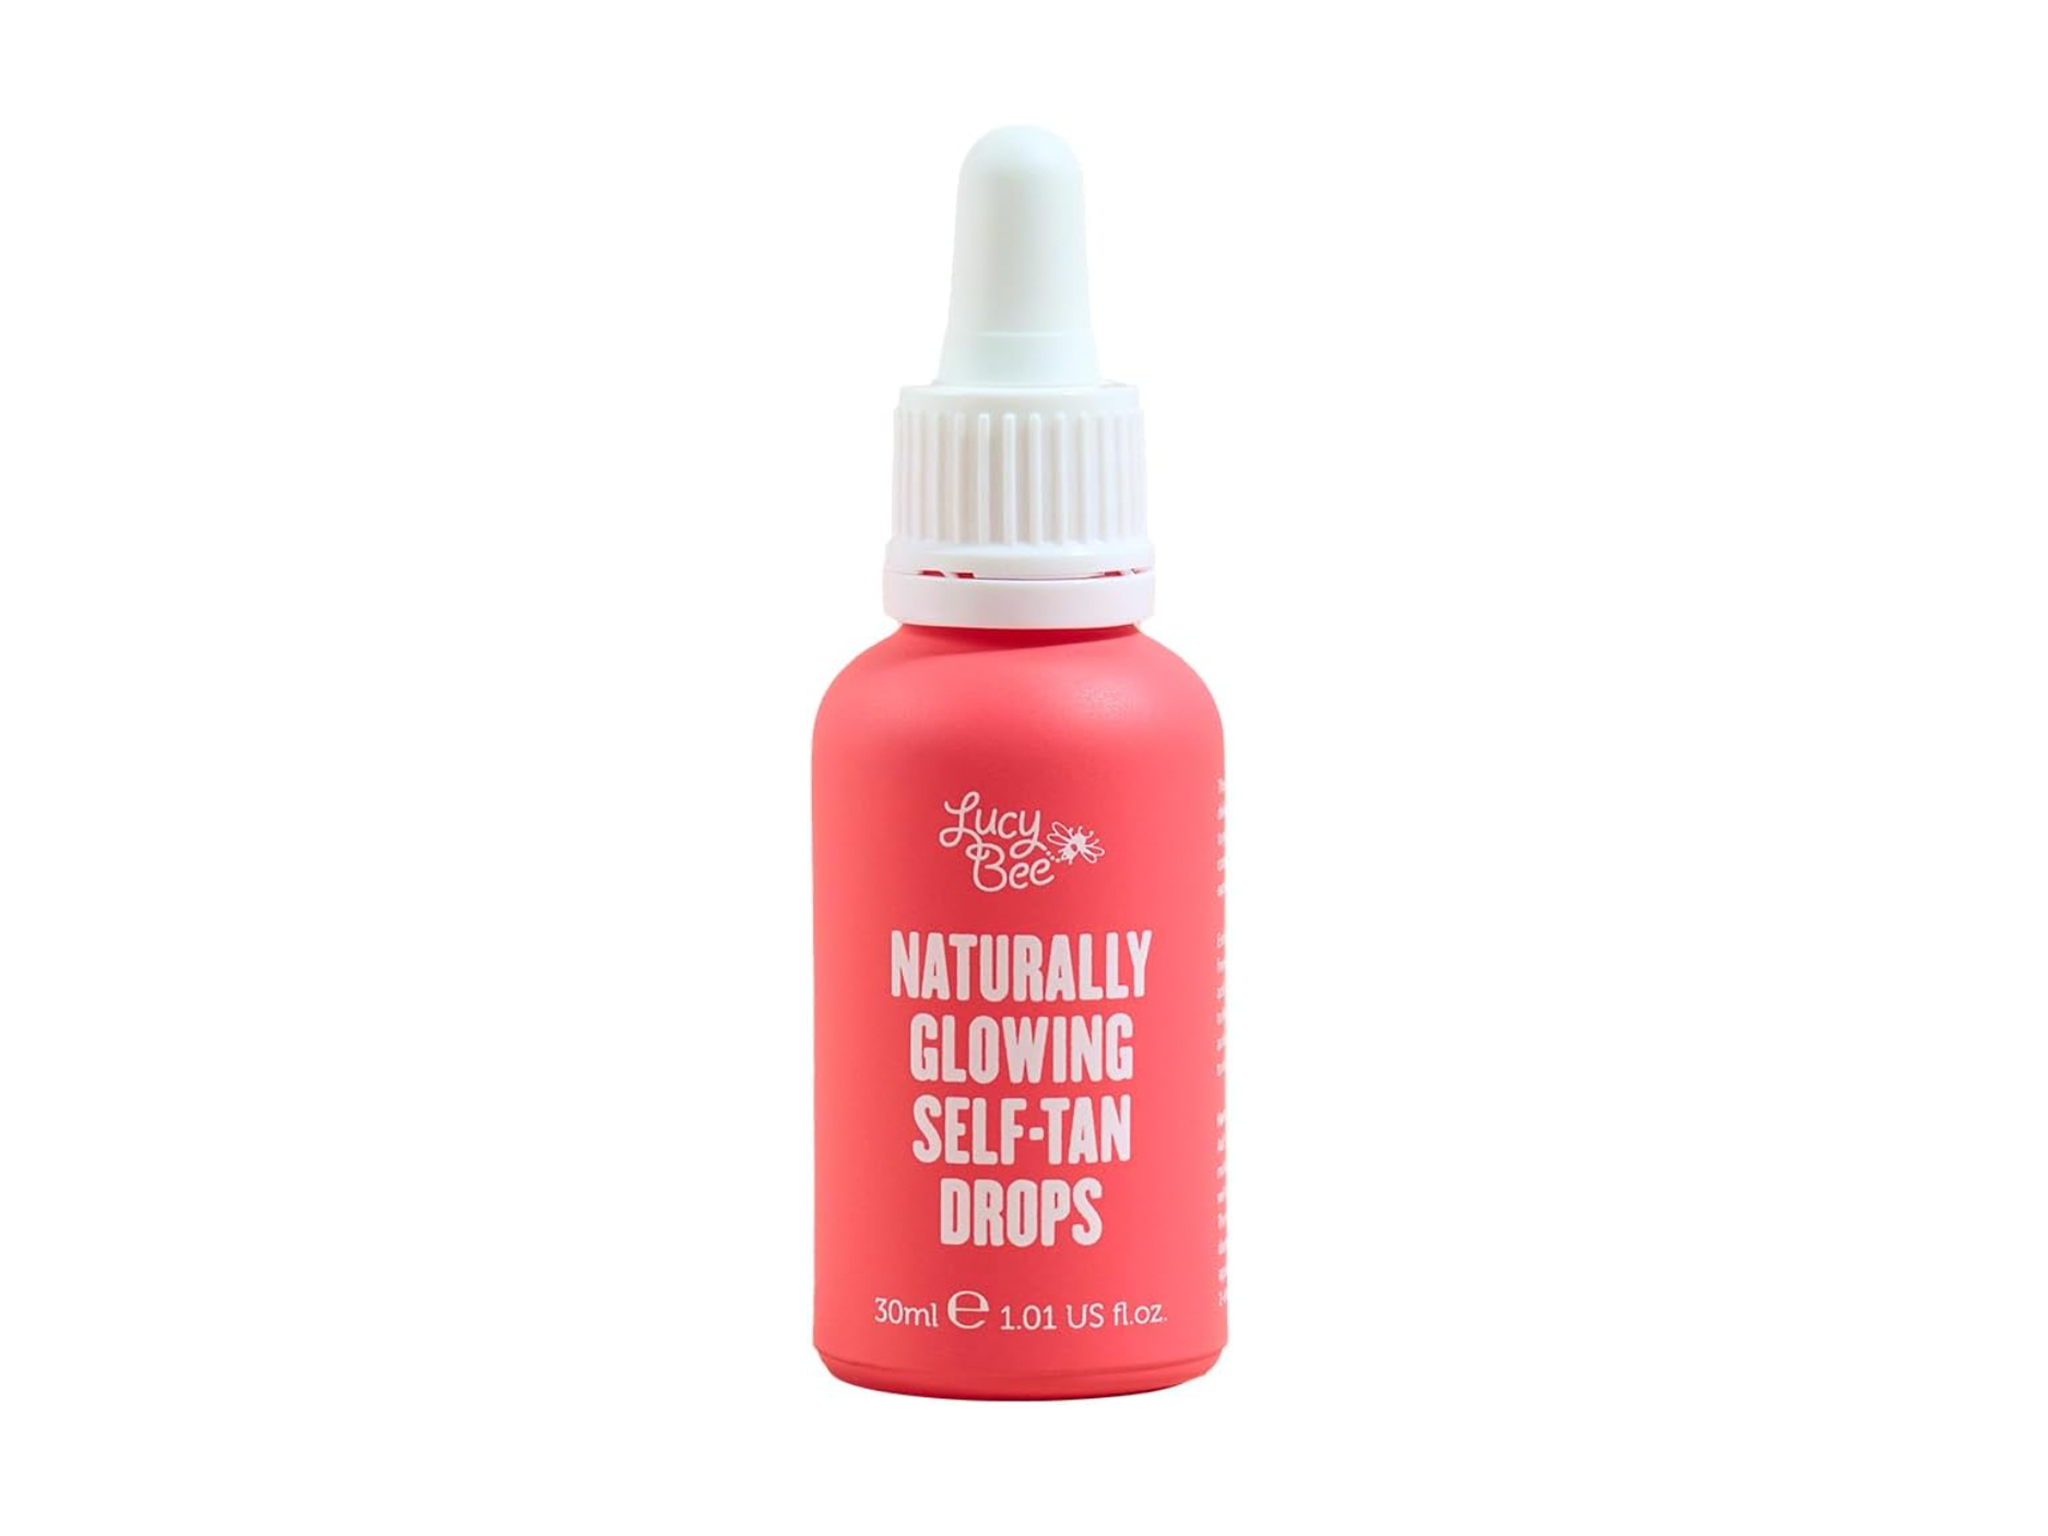 Lucy Bee fake tan drops for face and body